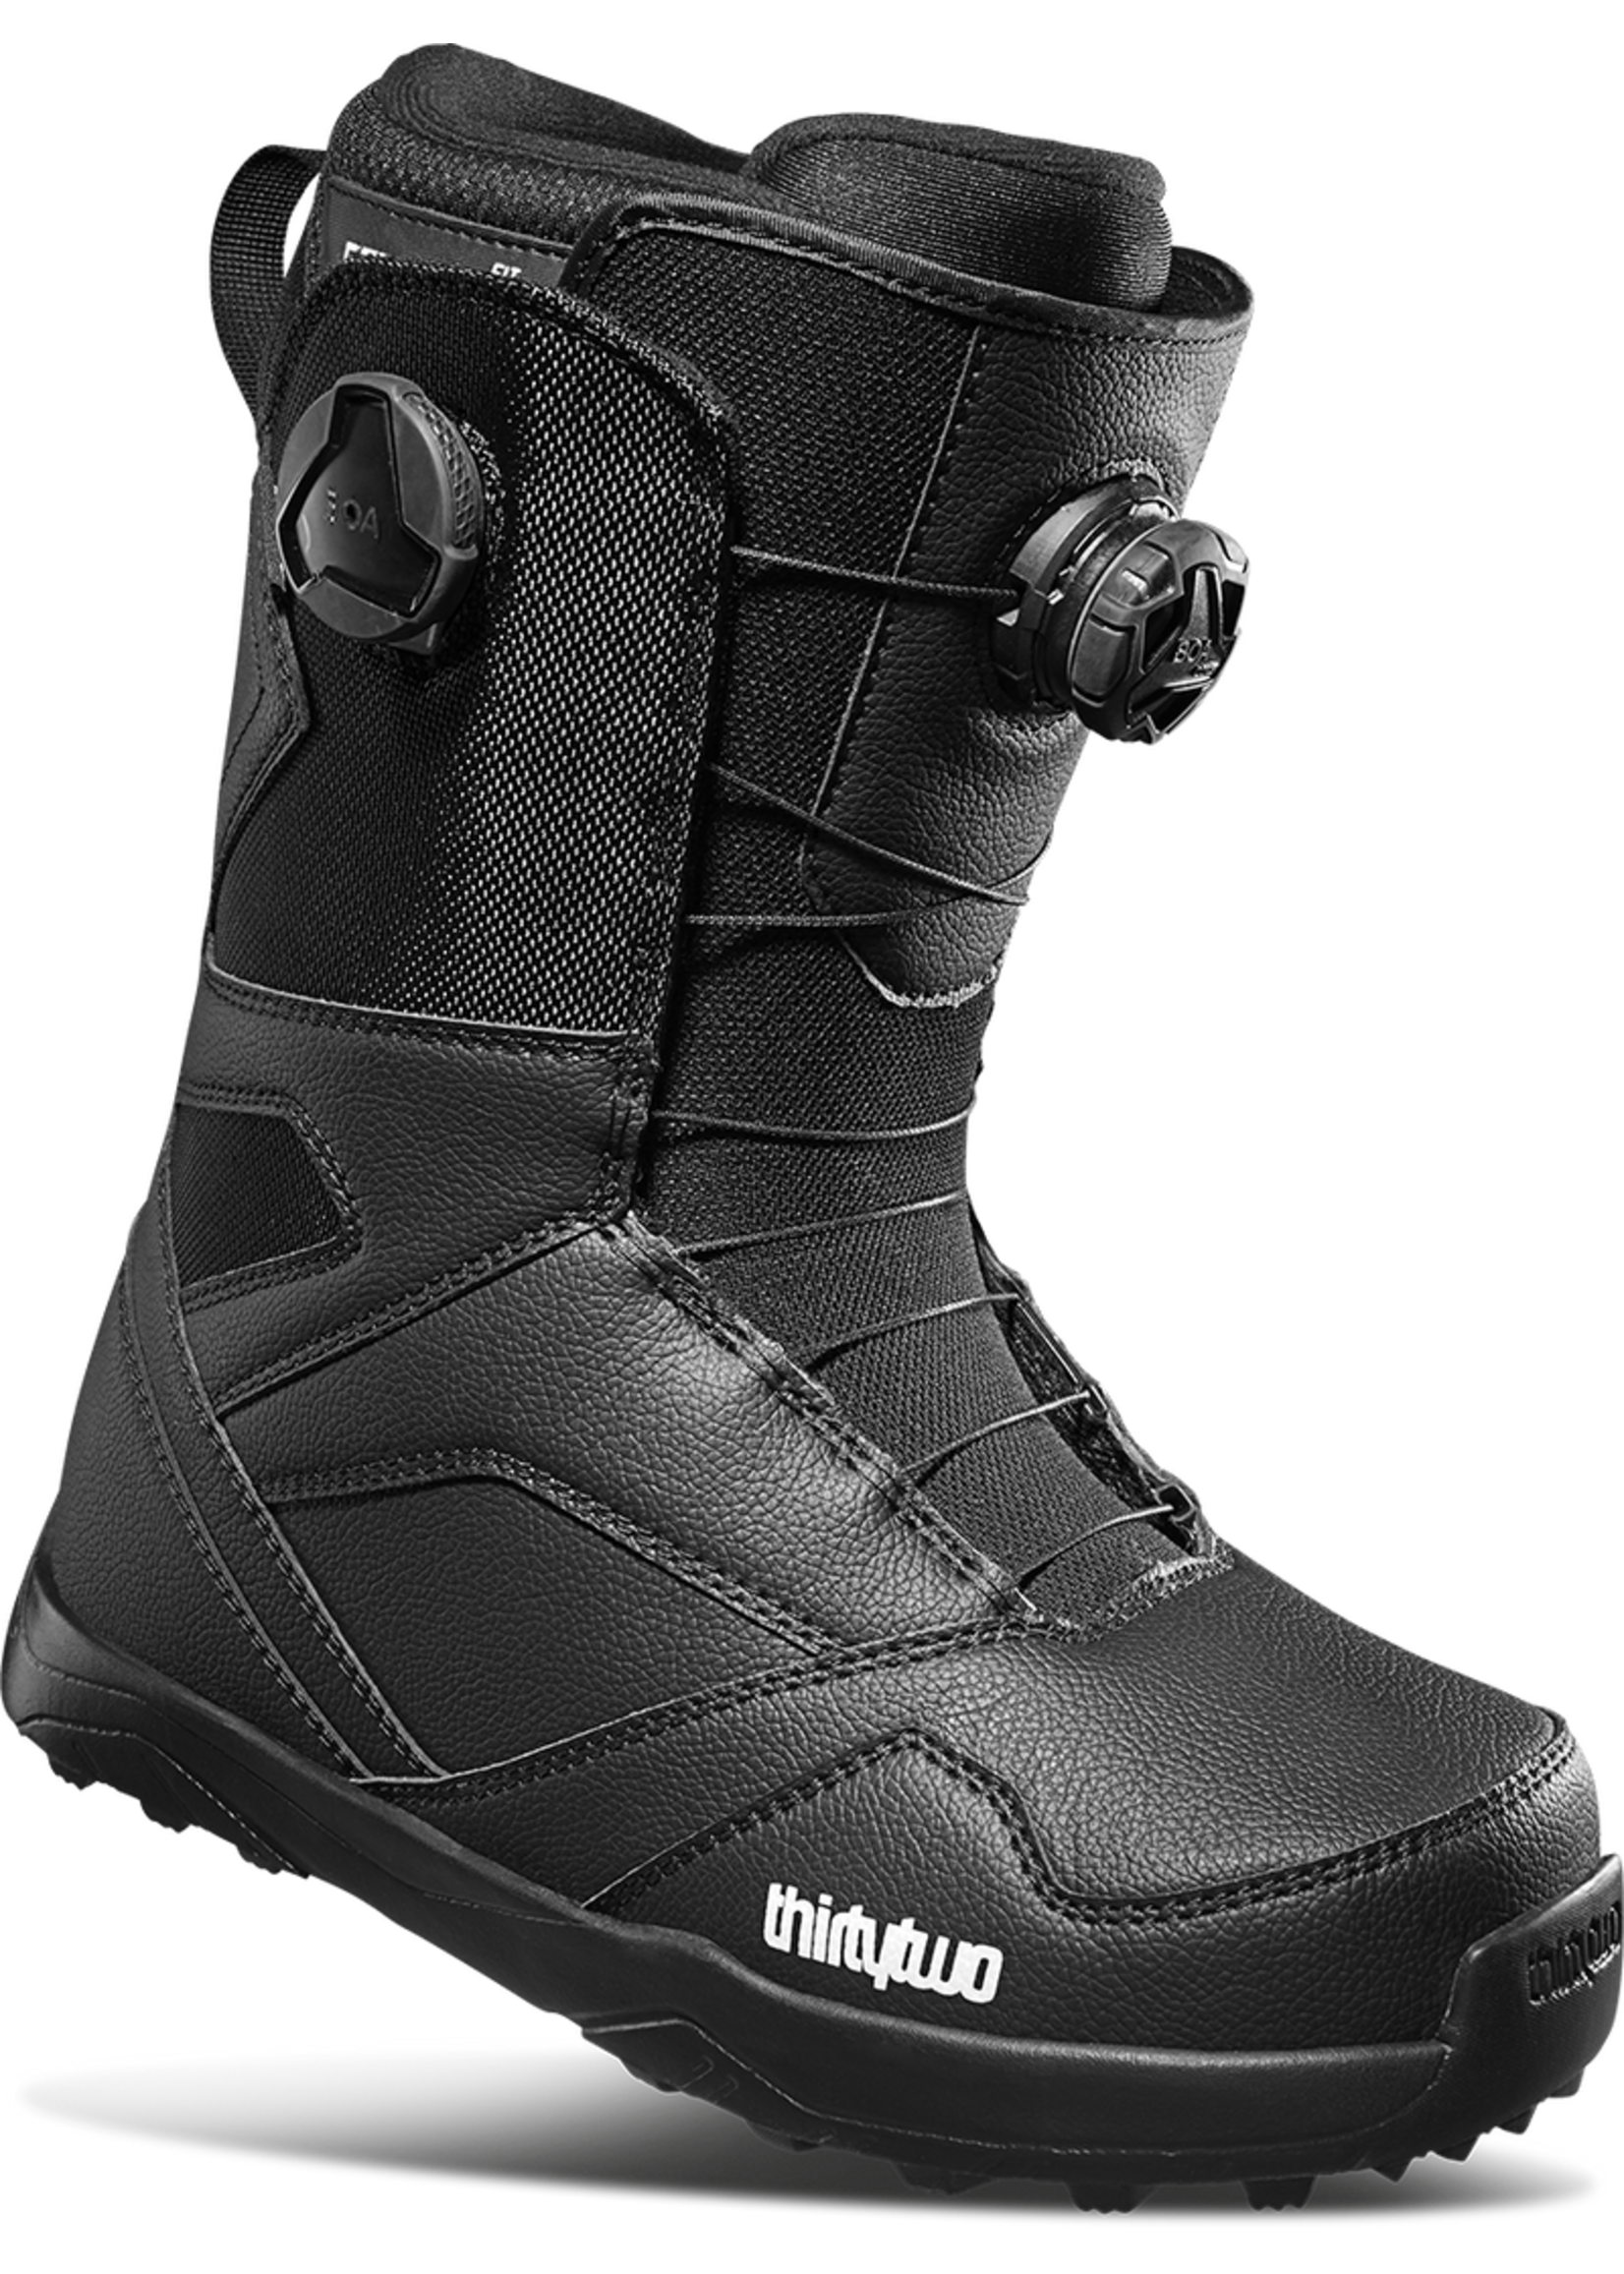 ThirtyTwo STW Double Boa Snowboard Boots - Black